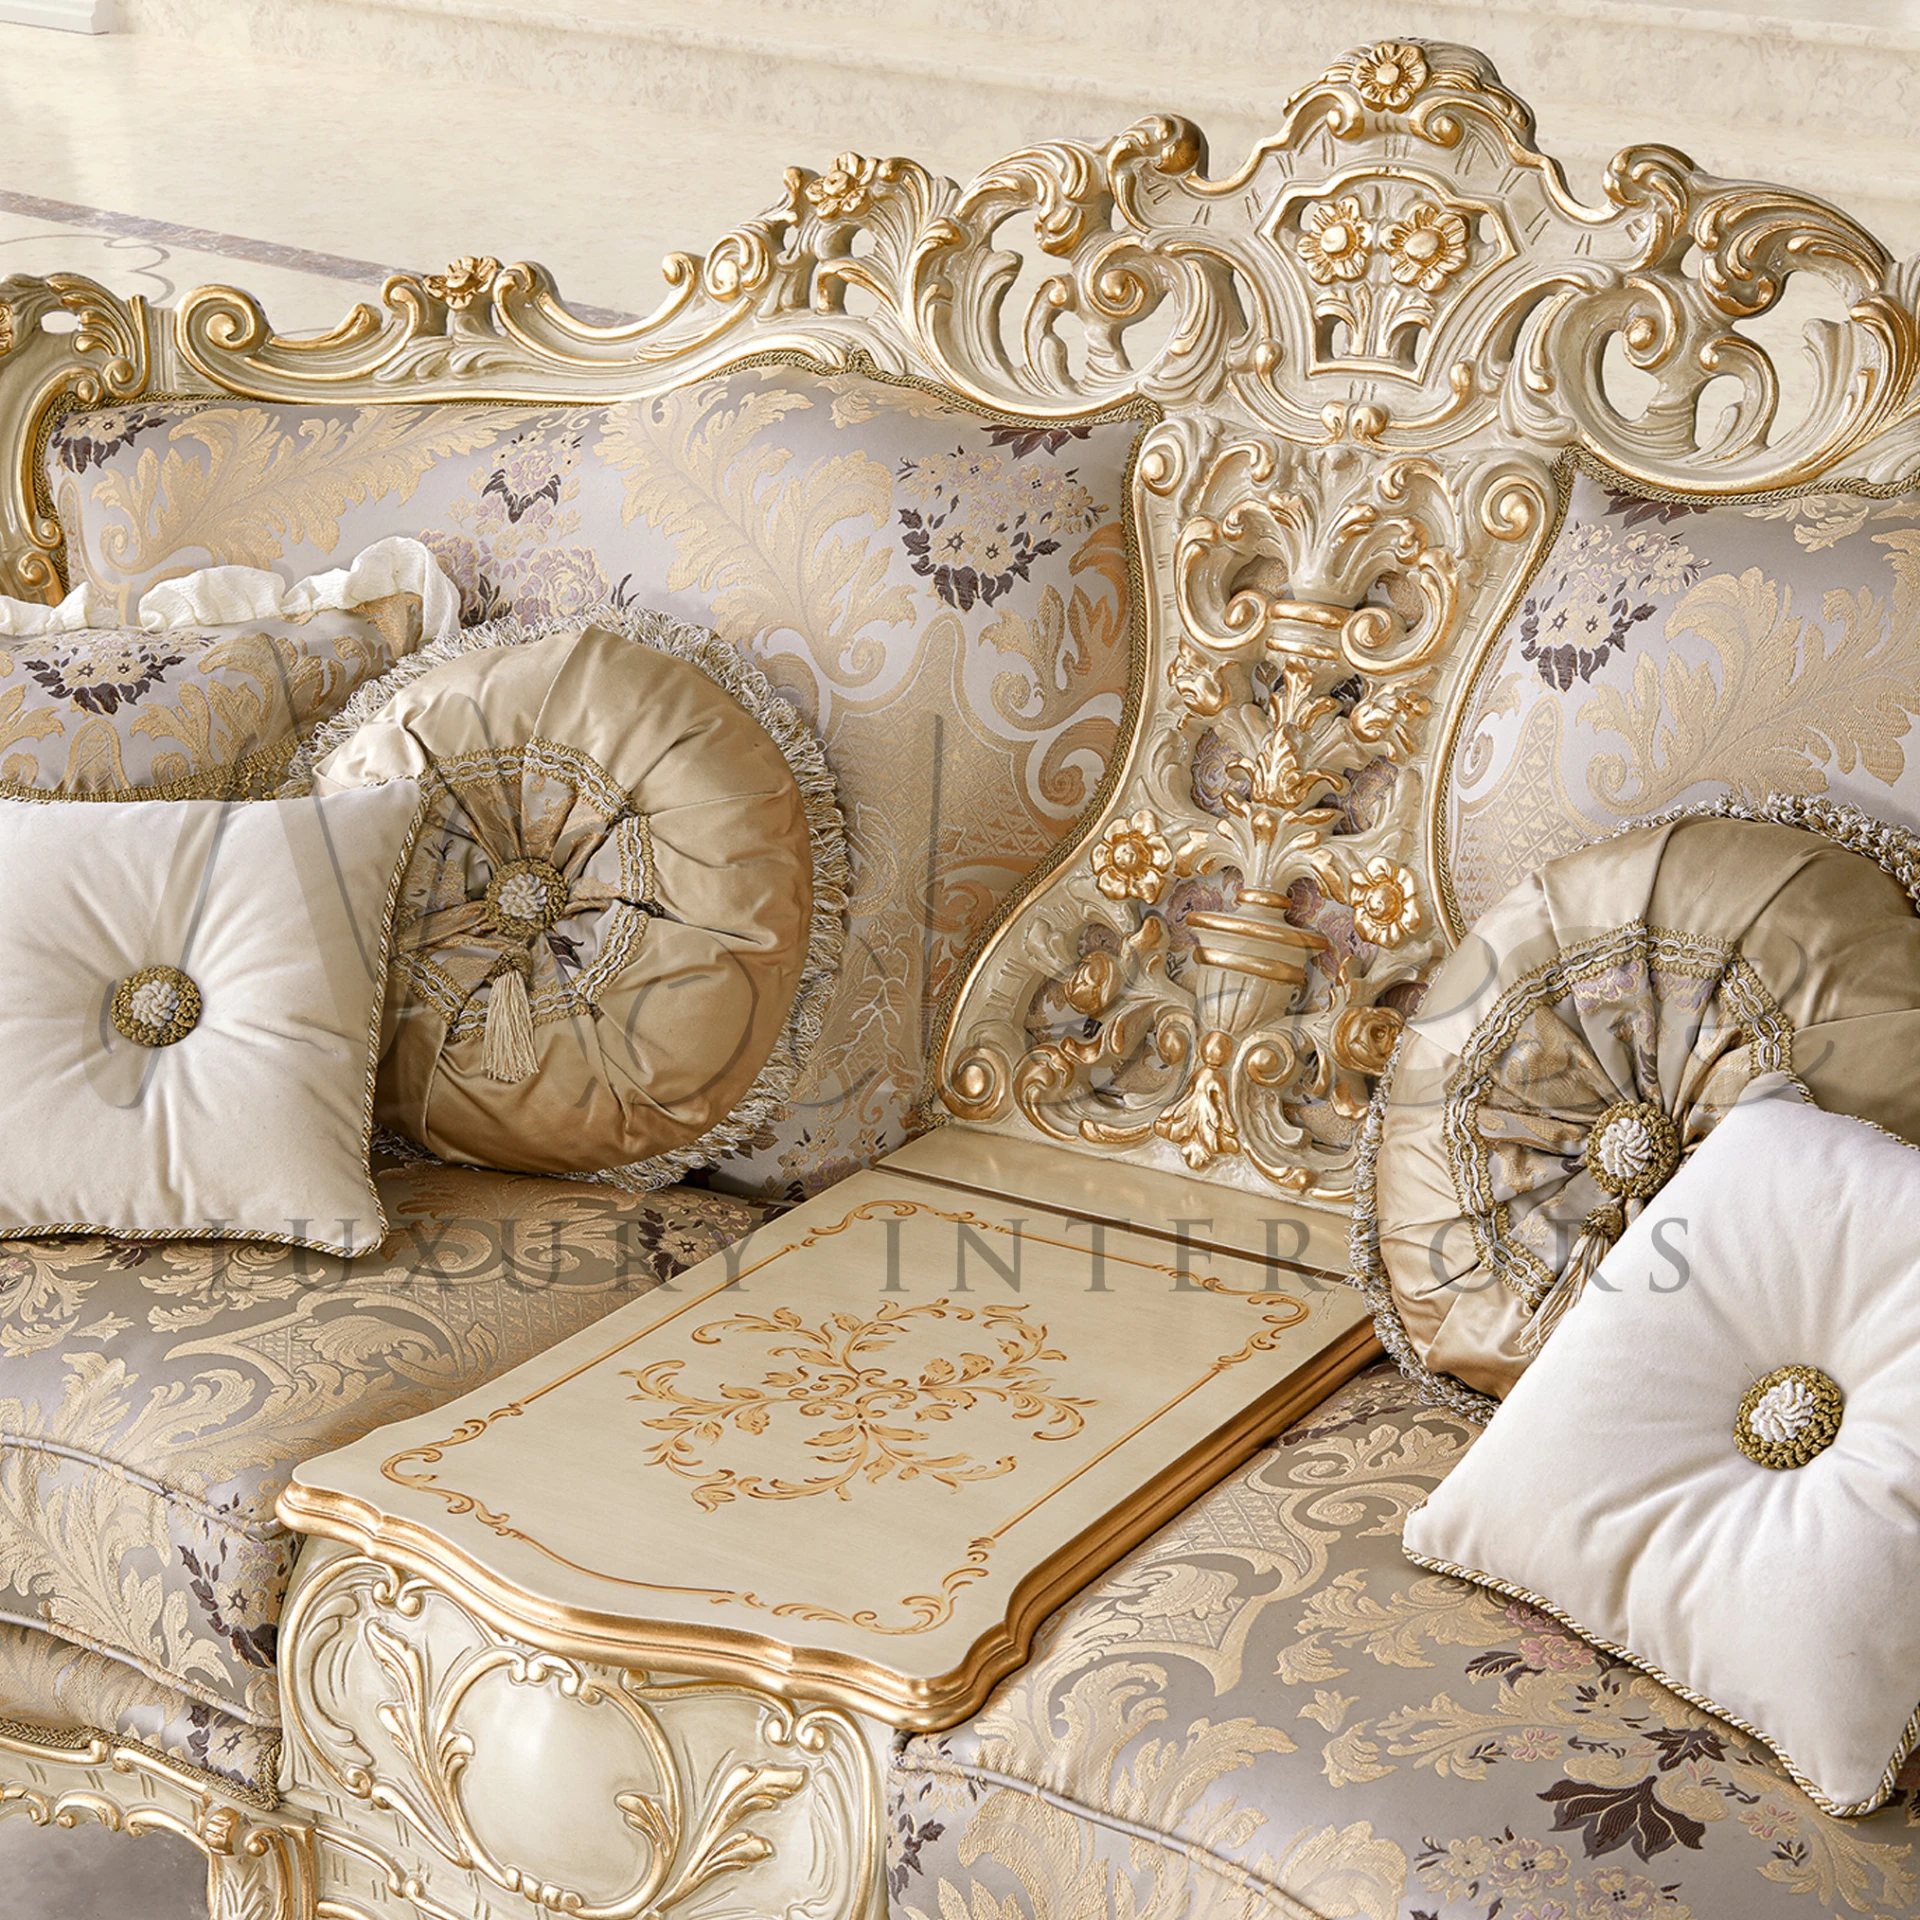 Classic collection: 2-seater sofa with storage, adorned with luxury upholstery and intricate carvings, a masterpiece of Italian design.
